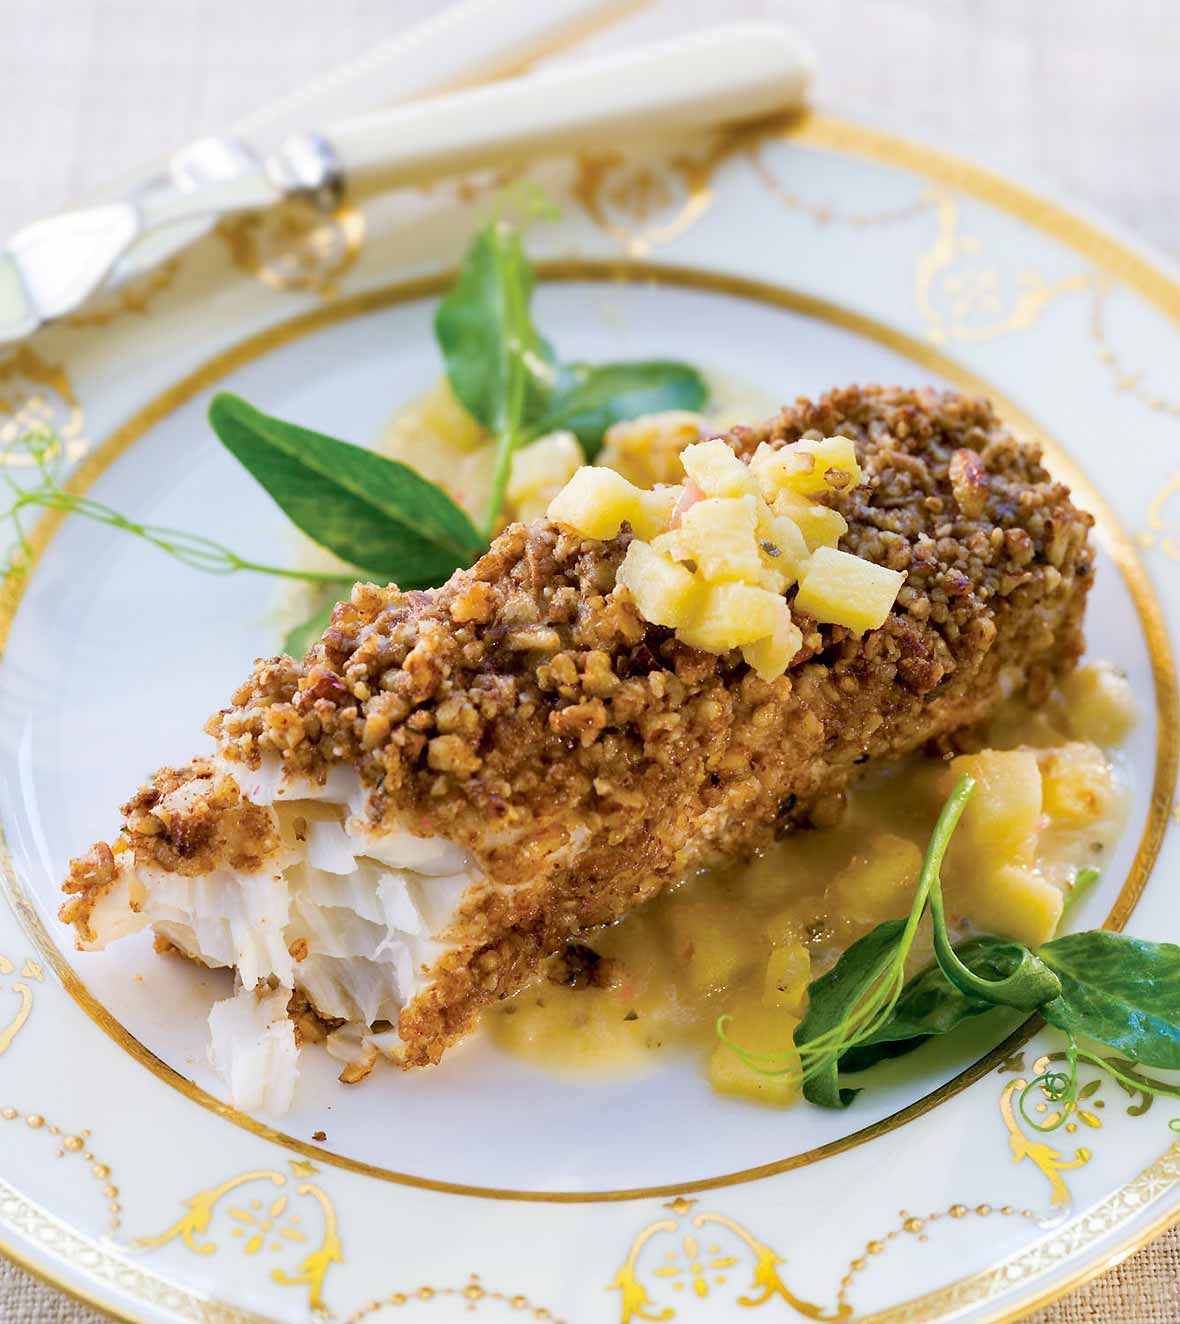 Halibut with nut crust, topped with apple vinaigrette, sitting on a plate with a knife and fork.